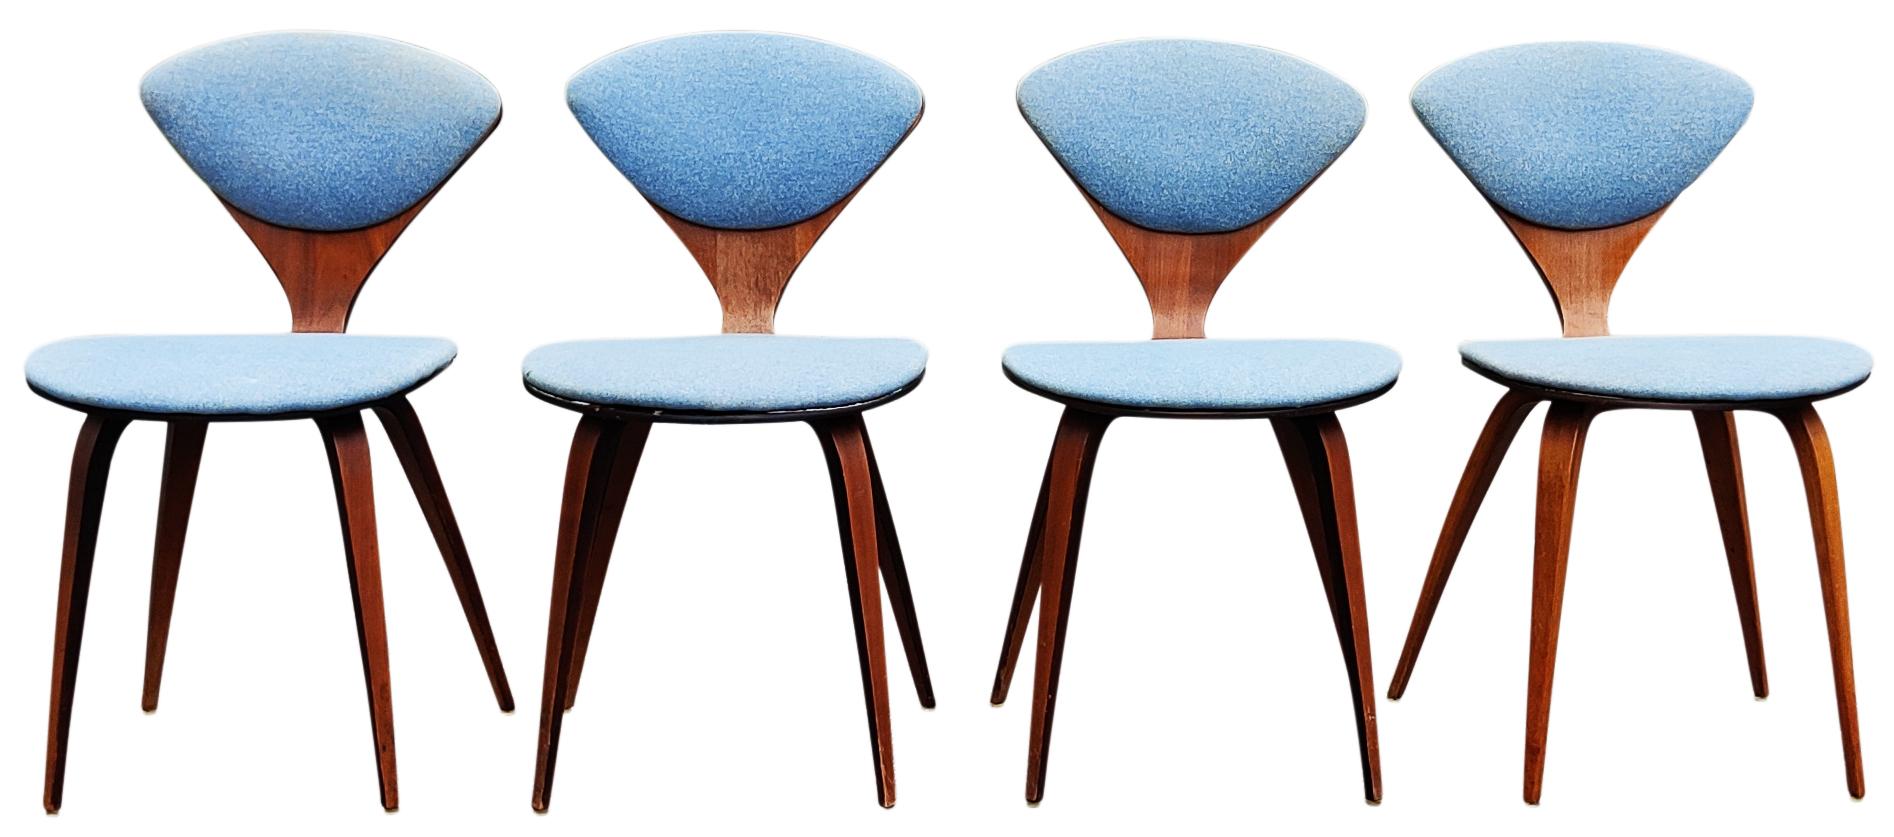 Iconic Pretzel side chairs (set of four) designed by Norman Cherner and made by Plycraft, 2 are still retaining original labels. Laminated walnut construction with older recovered blue upholstery. Surprisingly sturdy and comfortable. Please note, I